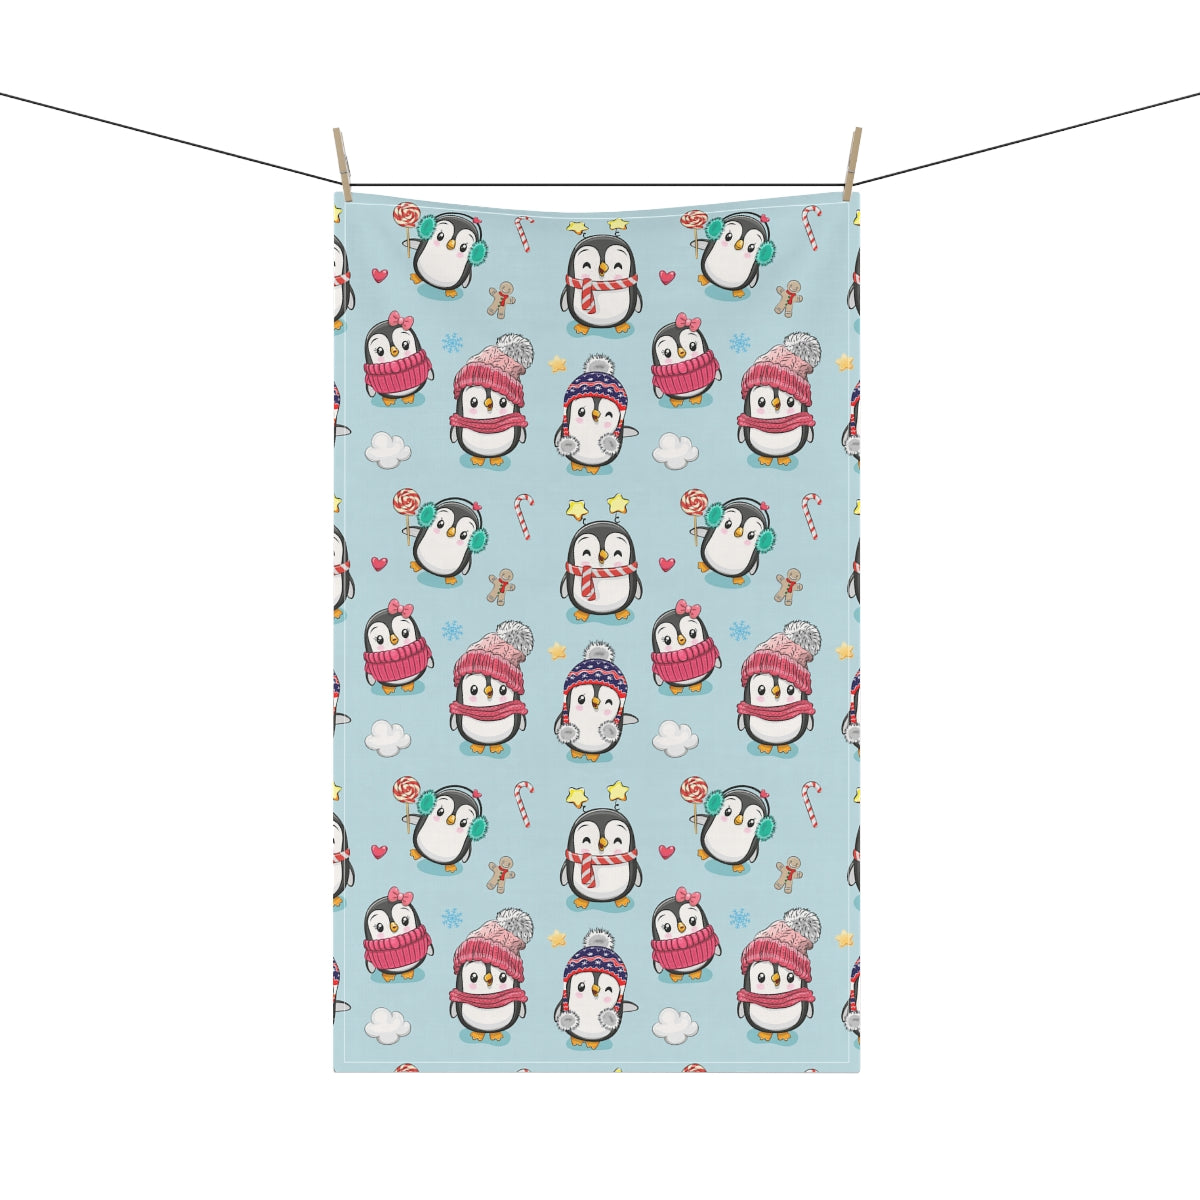 Penguins in Winter Clothes Kitchen Towel